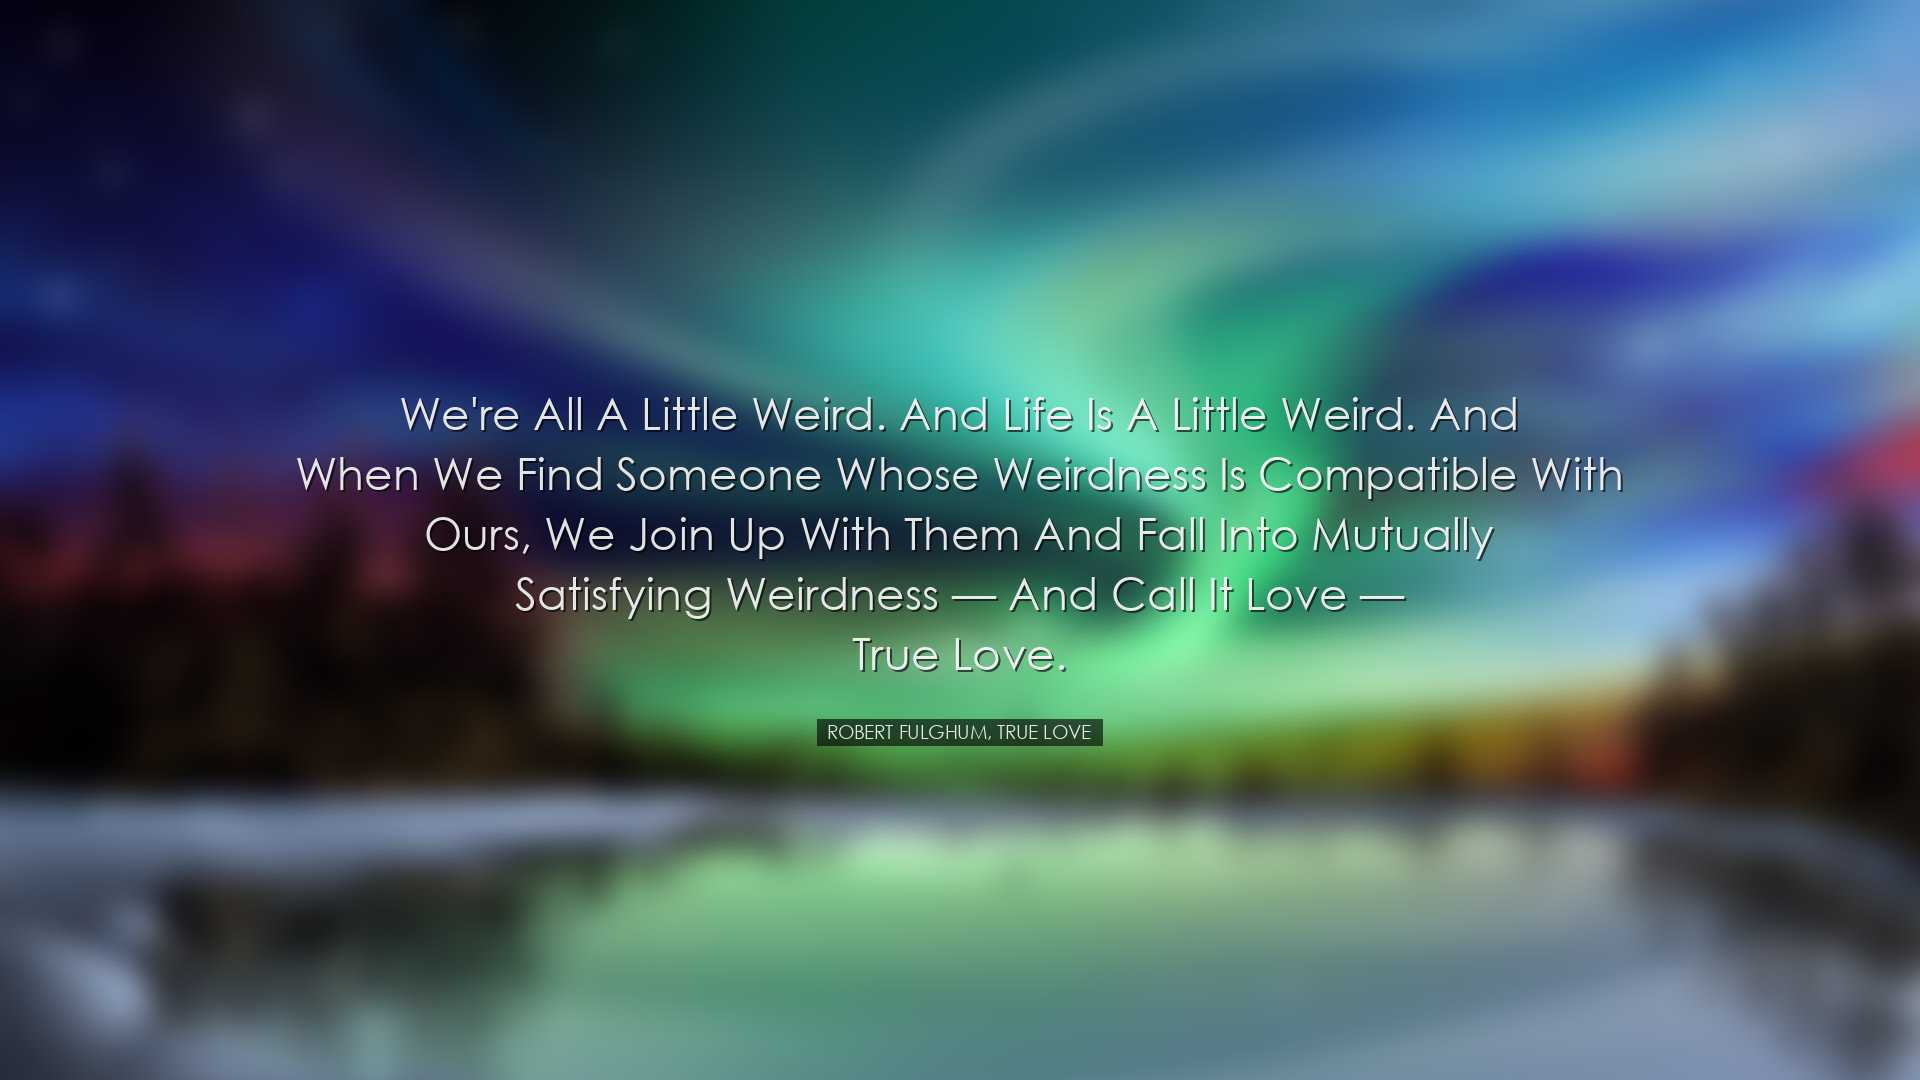 We're all a little weird. And life is a little weird. And when we